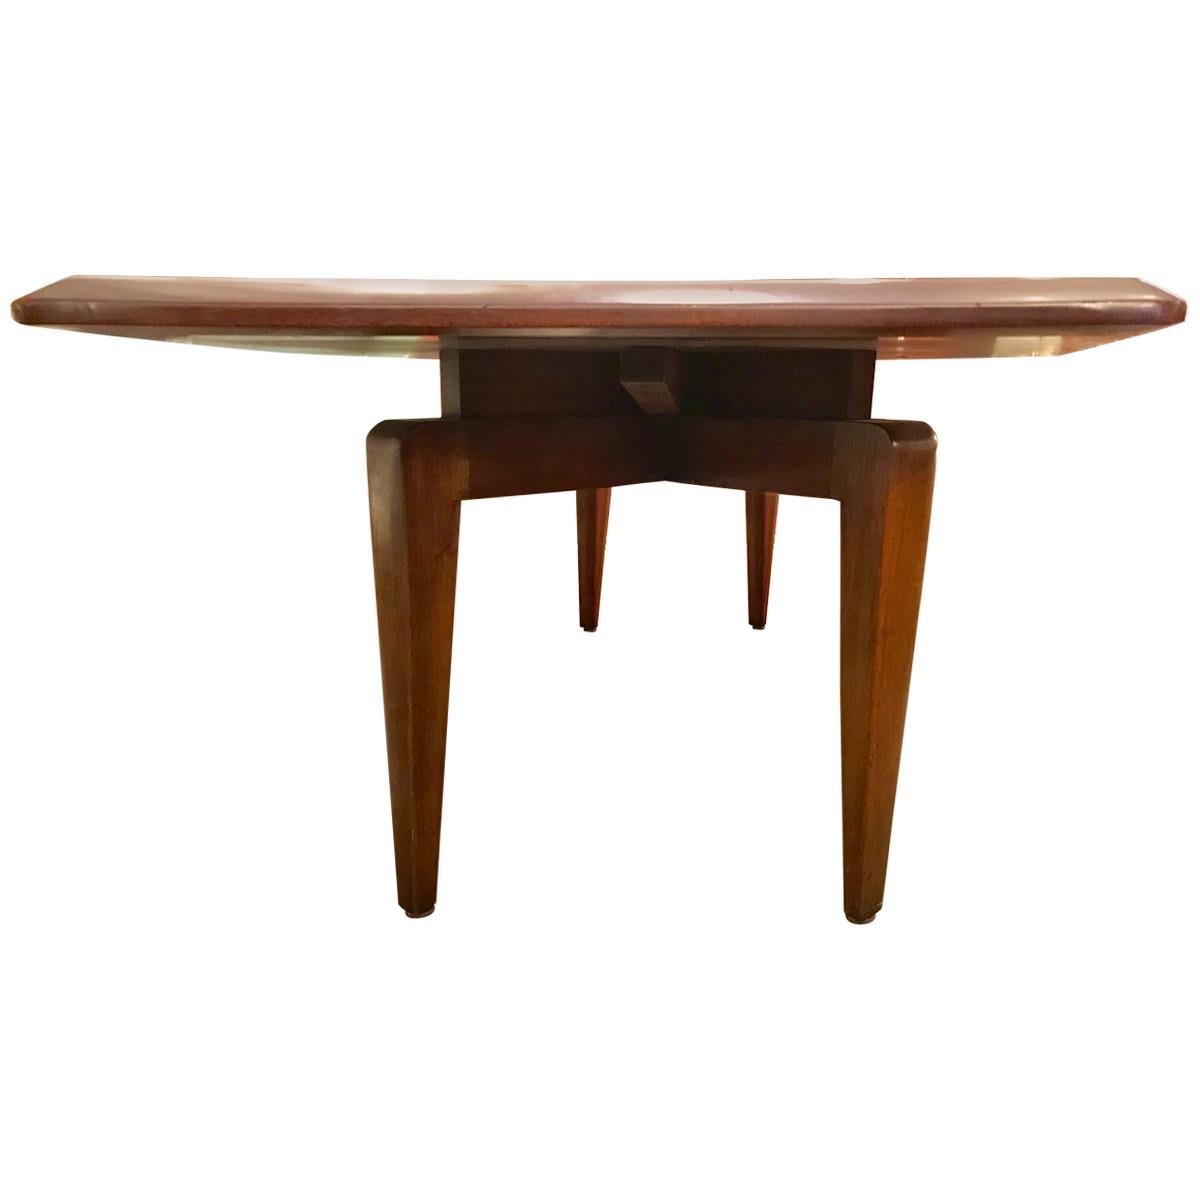 Sleek and sophisticated, this shapely Mid-Century Modern dining table is composed of walnut and features a geometric top with a bevelled edge and ebonized detailing. Stamped for ensured authenticity, this eye-catching dining table boasts rounded and